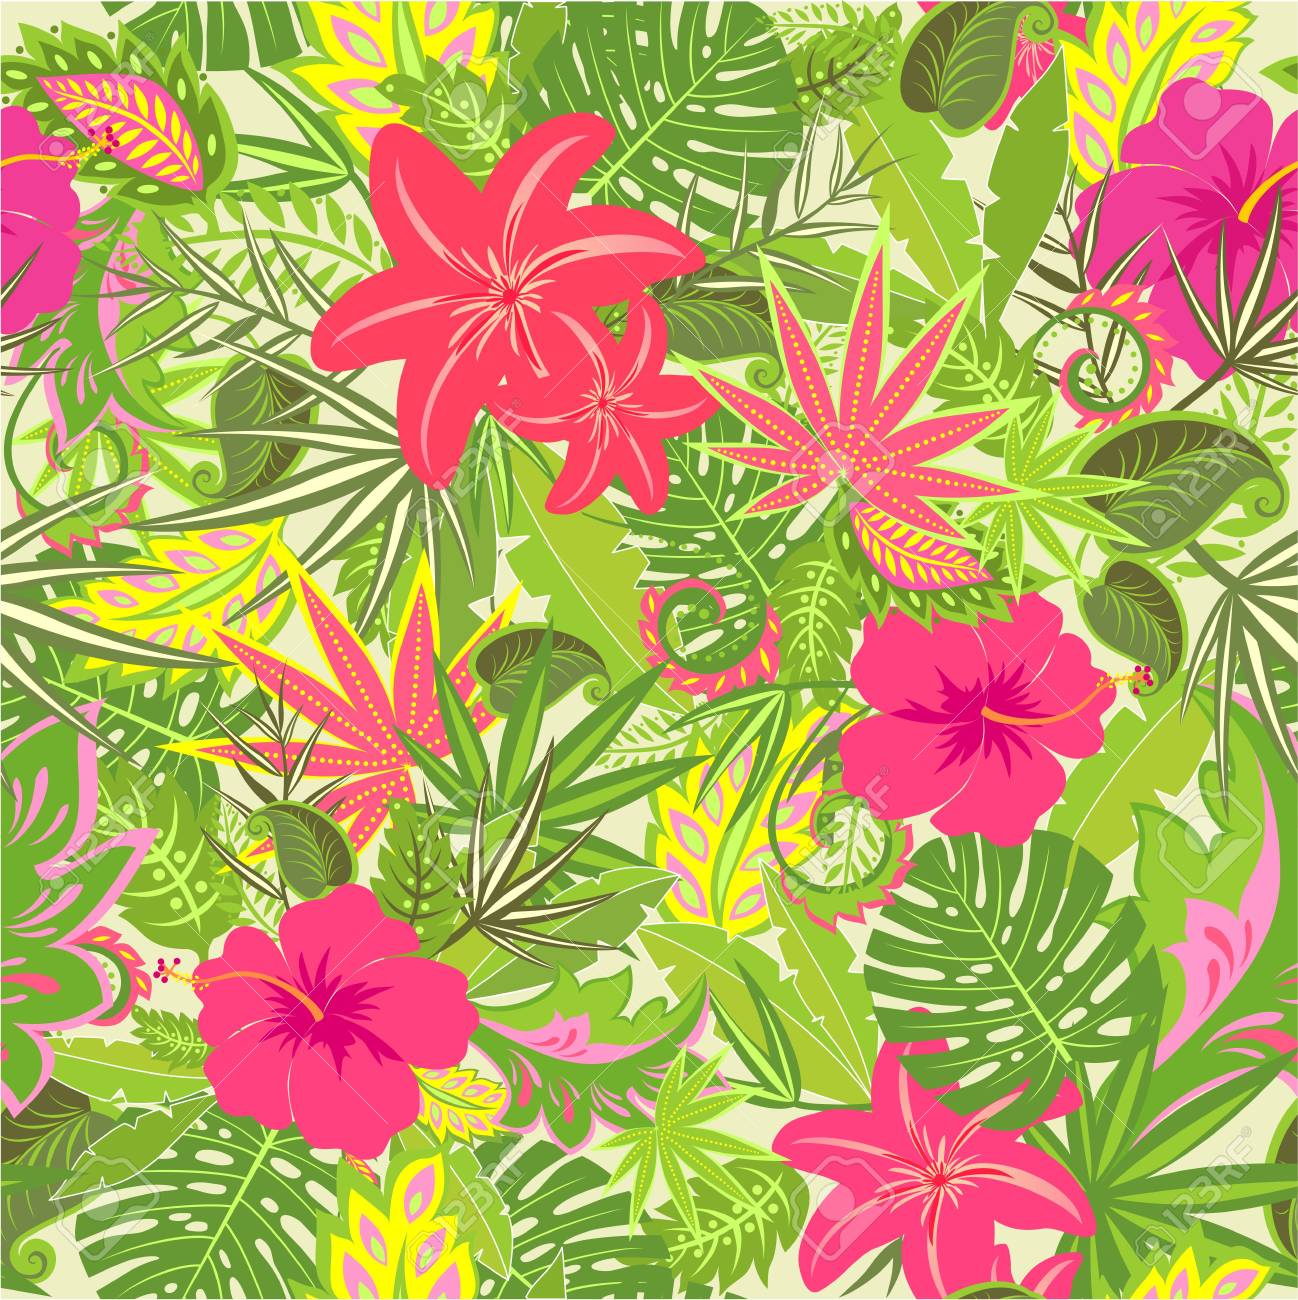 Summery Tropical Wallpaper With Colorful Leaves And Flowers